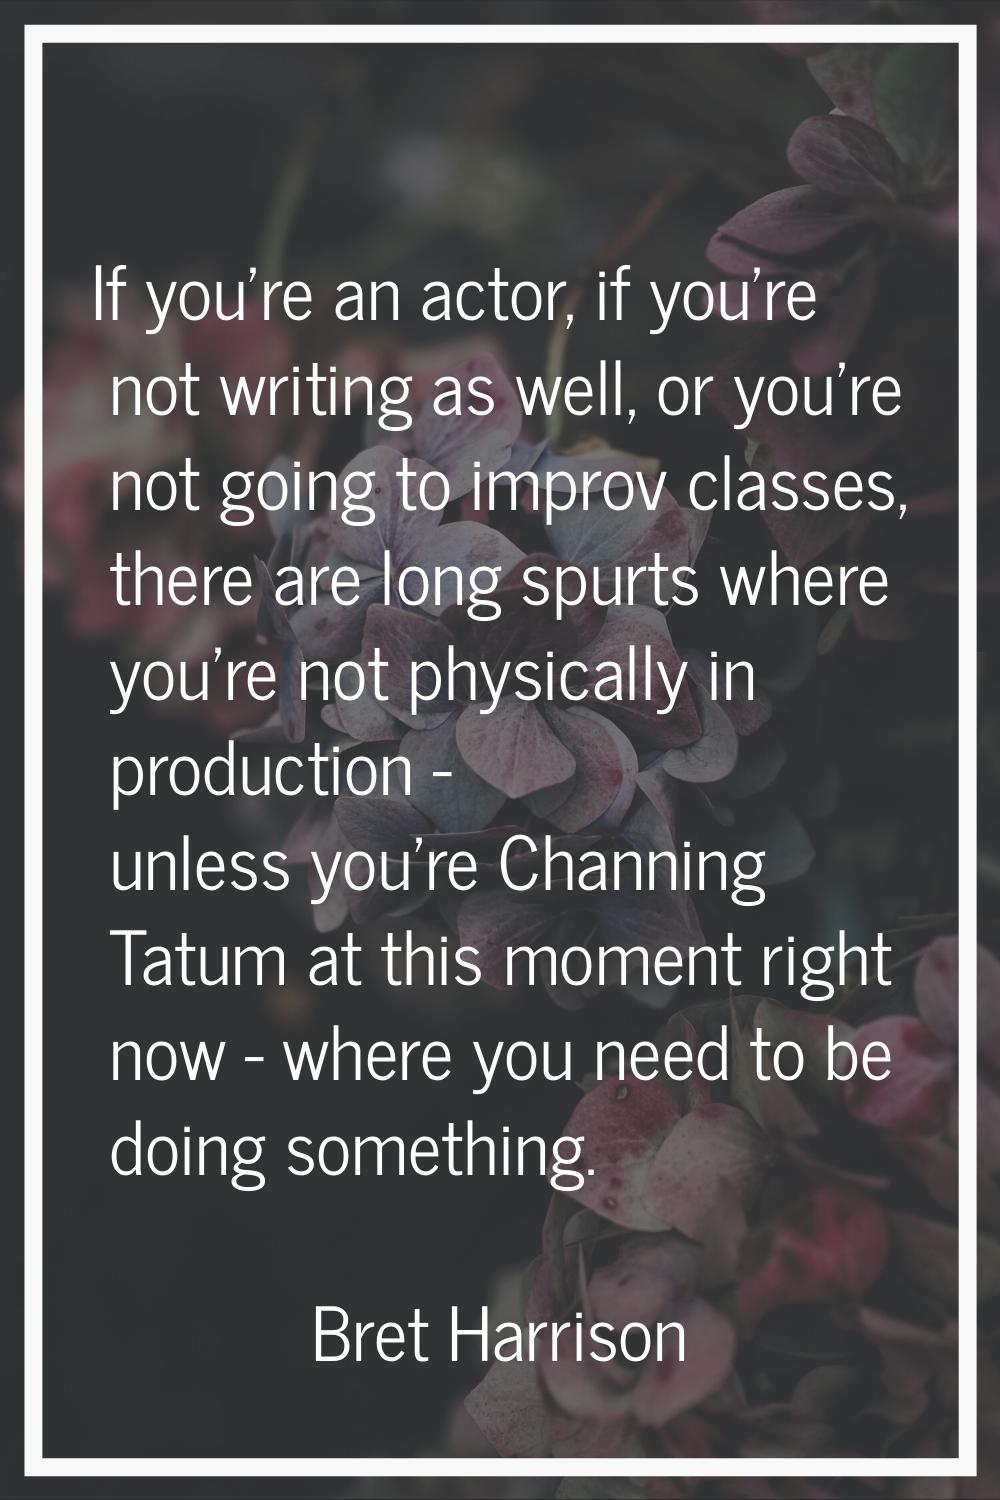 If you're an actor, if you're not writing as well, or you're not going to improv classes, there are